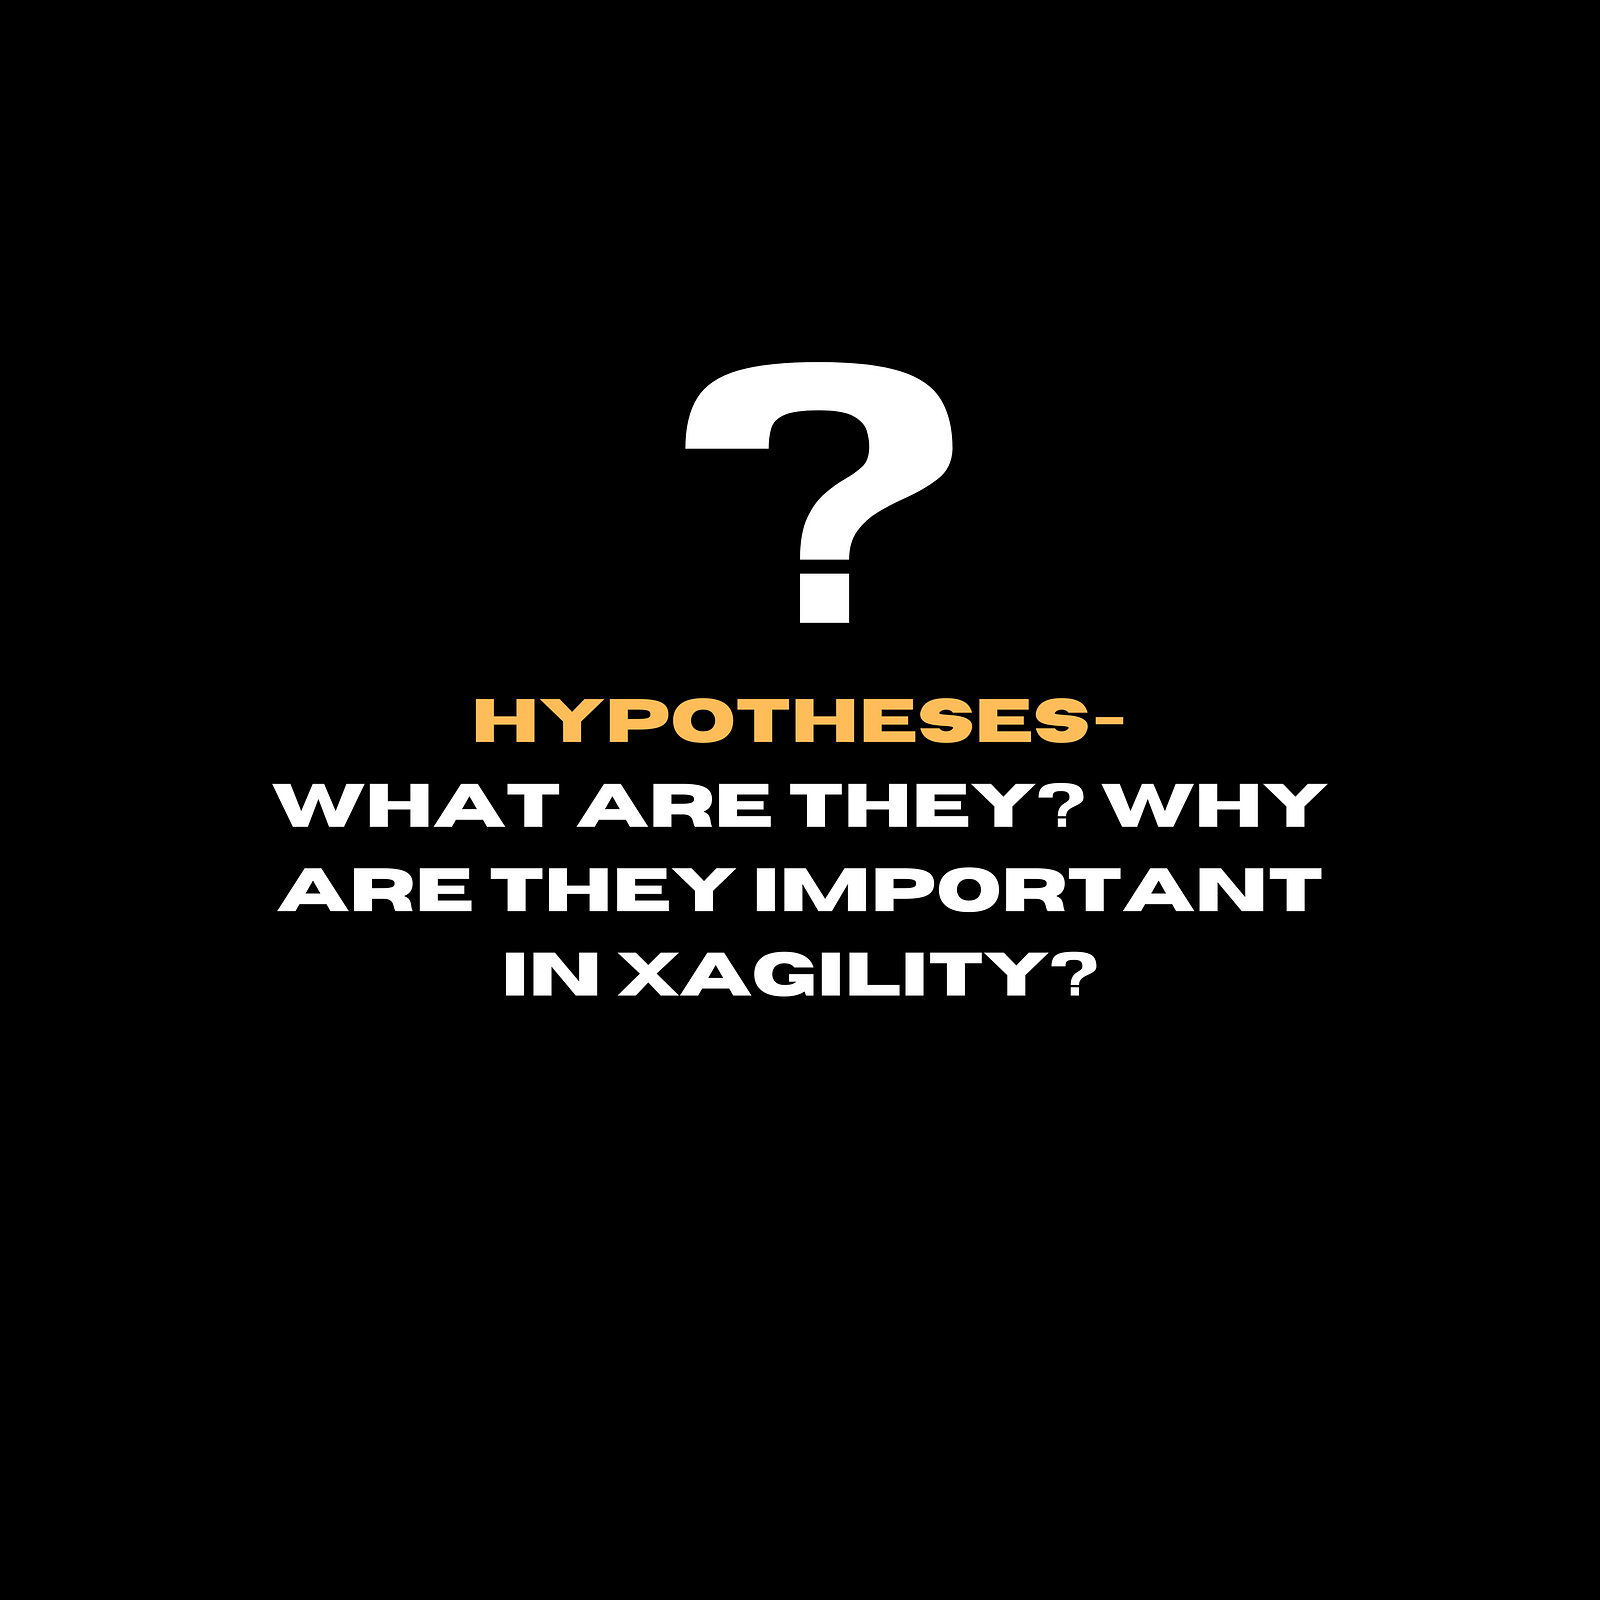 Hypotheses - what are they and why are they important in xagility